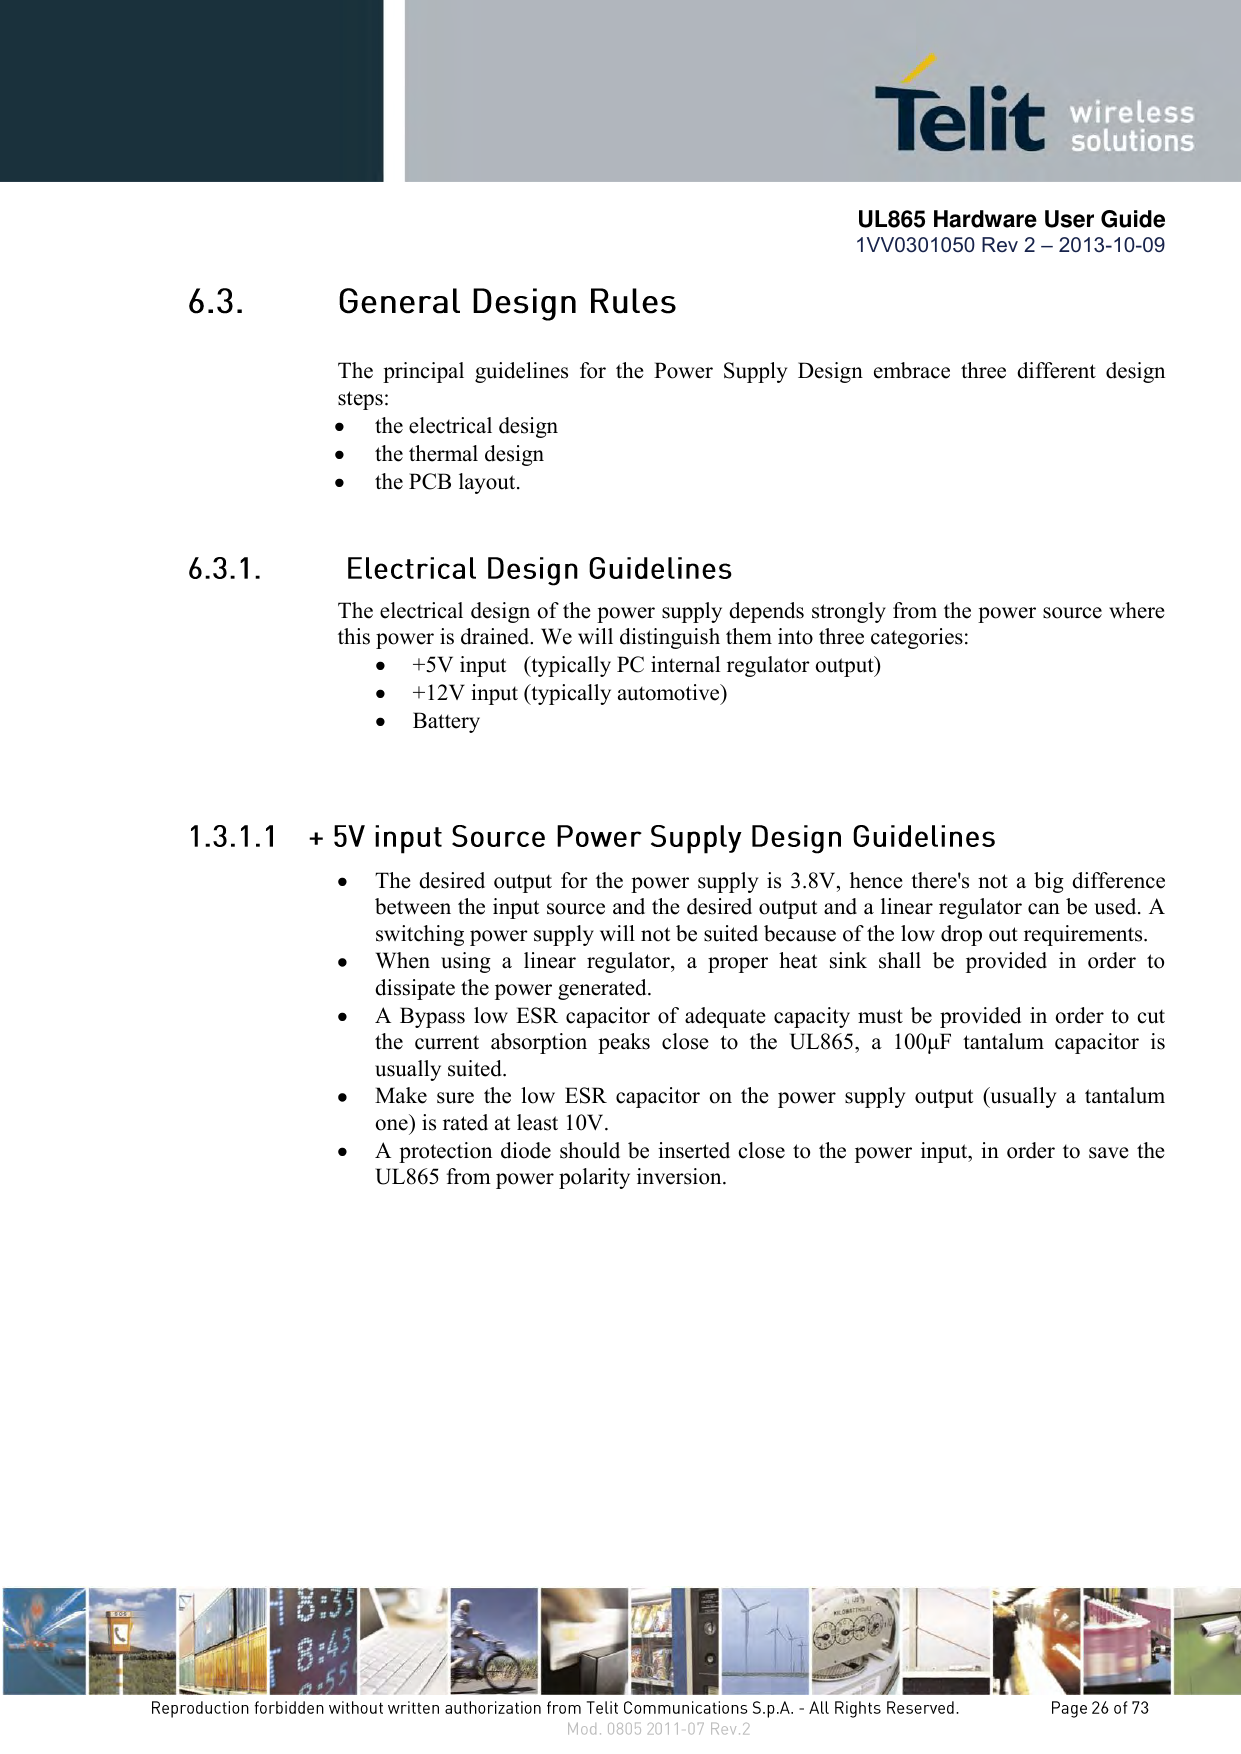       UL865 Hardware User Guide 1VV0301050 Rev 2 – 2013-10-09    The  principal  guidelines  for  the  Power  Supply  Design  embrace  three  different  design steps:  the electrical design  the thermal design  the PCB layout.  The electrical design of the power supply depends strongly from the power source where this power is drained. We will distinguish them into three categories:  +5V input   (typically PC internal regulator output)  +12V input (typically automotive)  Battery   The desired output for the power supply is 3.8V, hence there&apos;s not a big difference between the input source and the desired output and a linear regulator can be used. A switching power supply will not be suited because of the low drop out requirements.  When  using  a  linear  regulator,  a  proper  heat  sink  shall  be  provided  in  order  to dissipate the power generated.  A Bypass low ESR capacitor of adequate capacity must be provided in order to cut the  current  absorption  peaks  close  to  the  UL865,  a  100μF  tantalum  capacitor  is usually suited.  Make  sure  the  low  ESR  capacitor  on  the  power  supply  output  (usually a  tantalum one) is rated at least 10V.  A protection diode should be inserted close to the power input, in order to save the UL865 from power polarity inversion. 